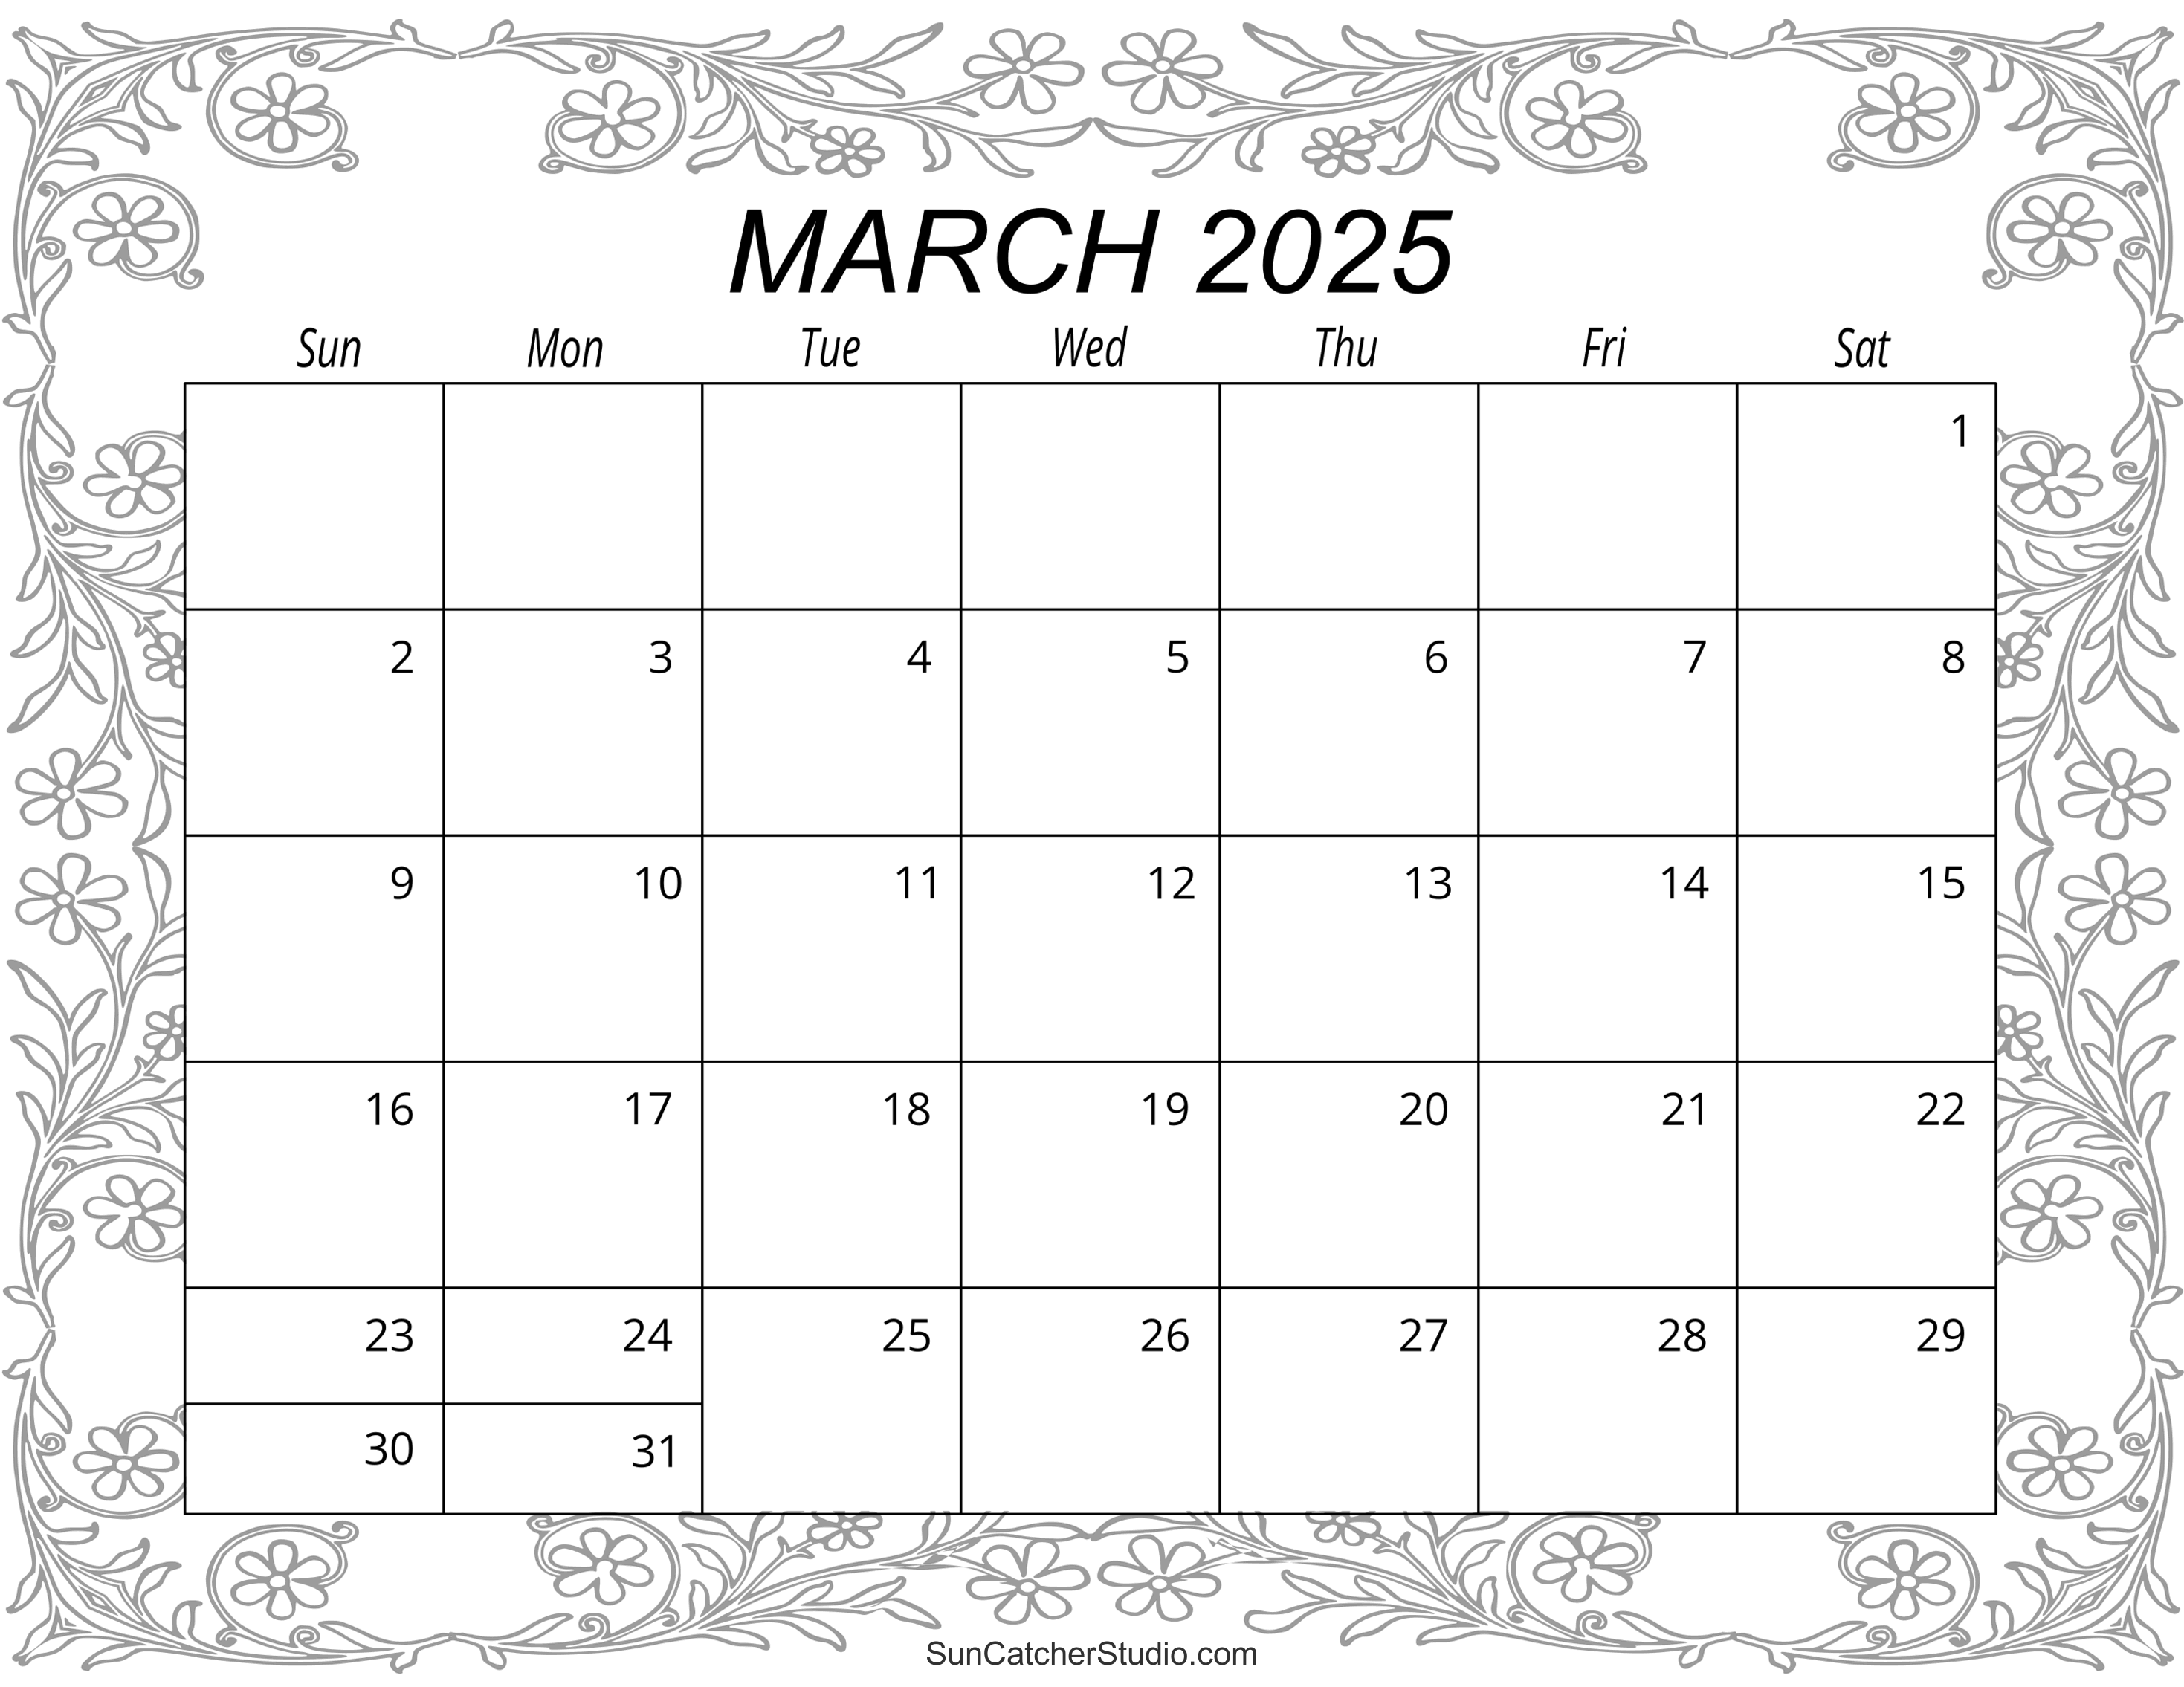 March 2025 Calendar (Free Printable) DIY Projects, Patterns